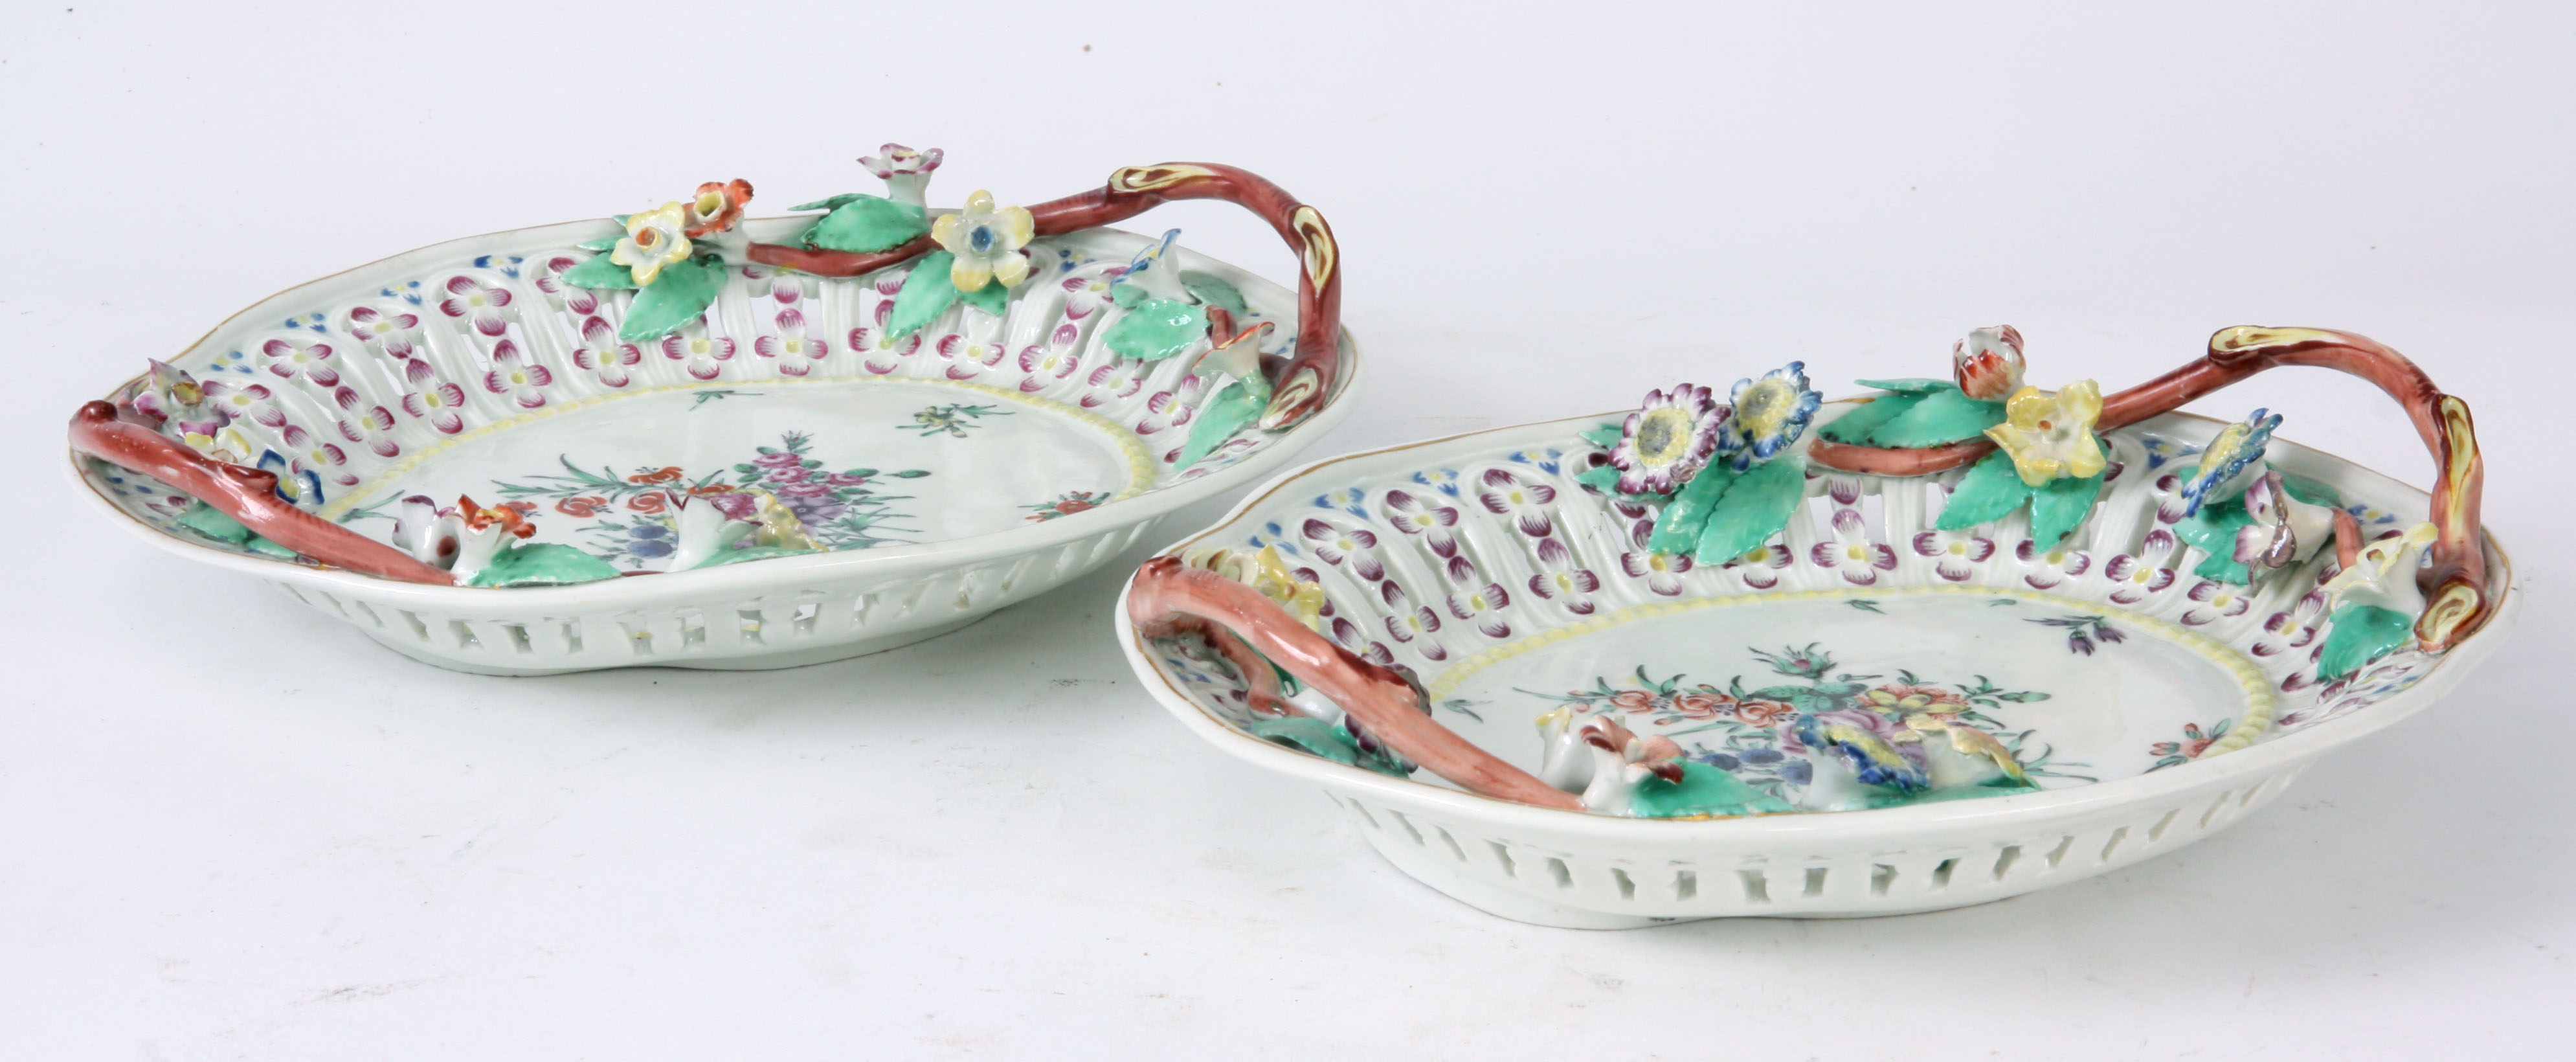 A PAIR OF LATE 18TH CENTURY FIRST PERIOD WORCESTER FACTORY PORCELAIN PIERCED DISHES